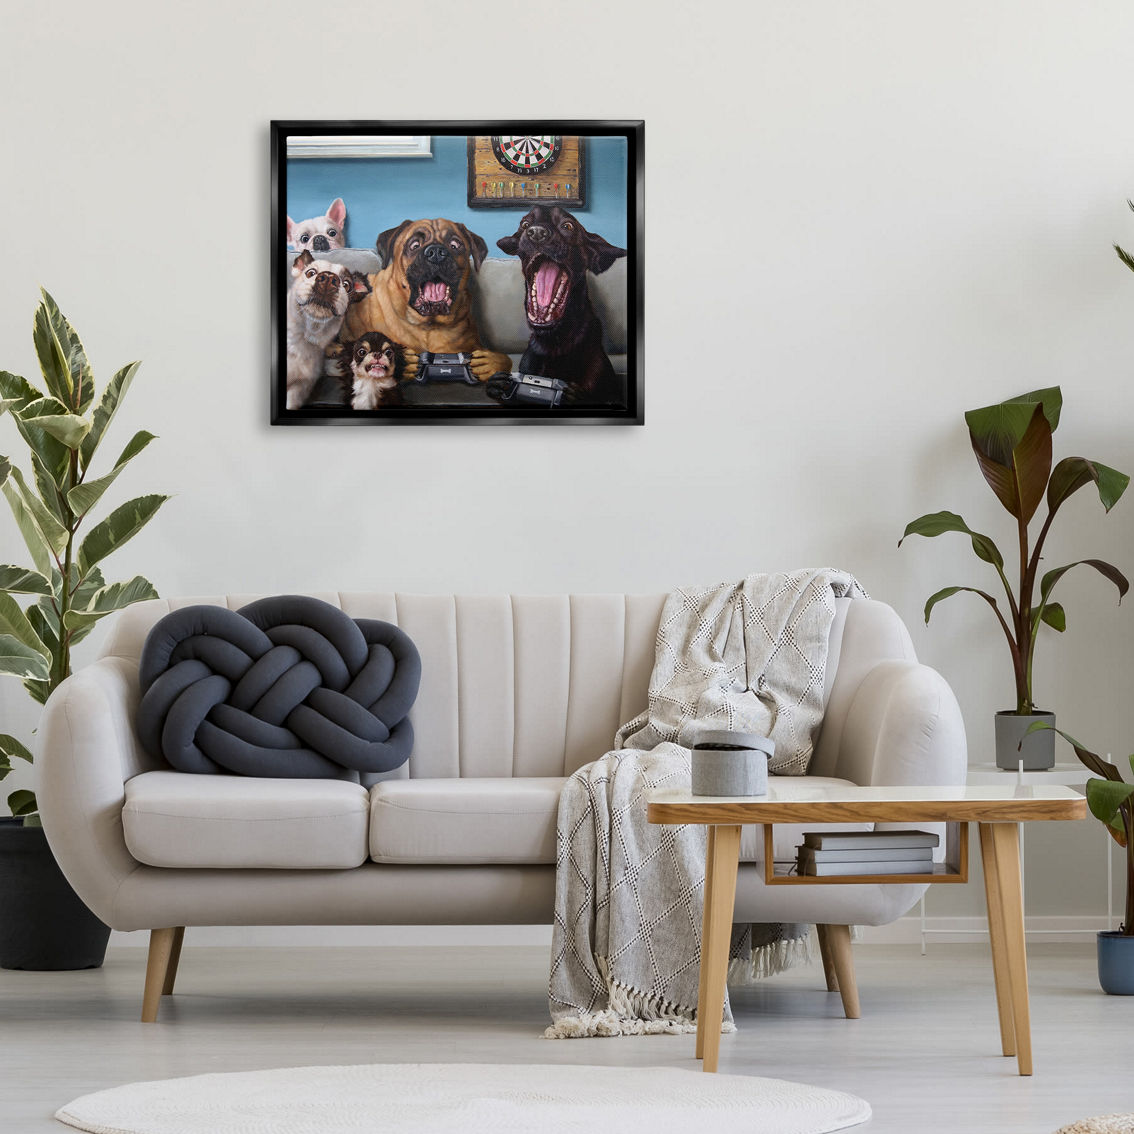 Stupell Black Floater Framed Funny Dogs Playing Video Games, 25x31 - Image 2 of 5